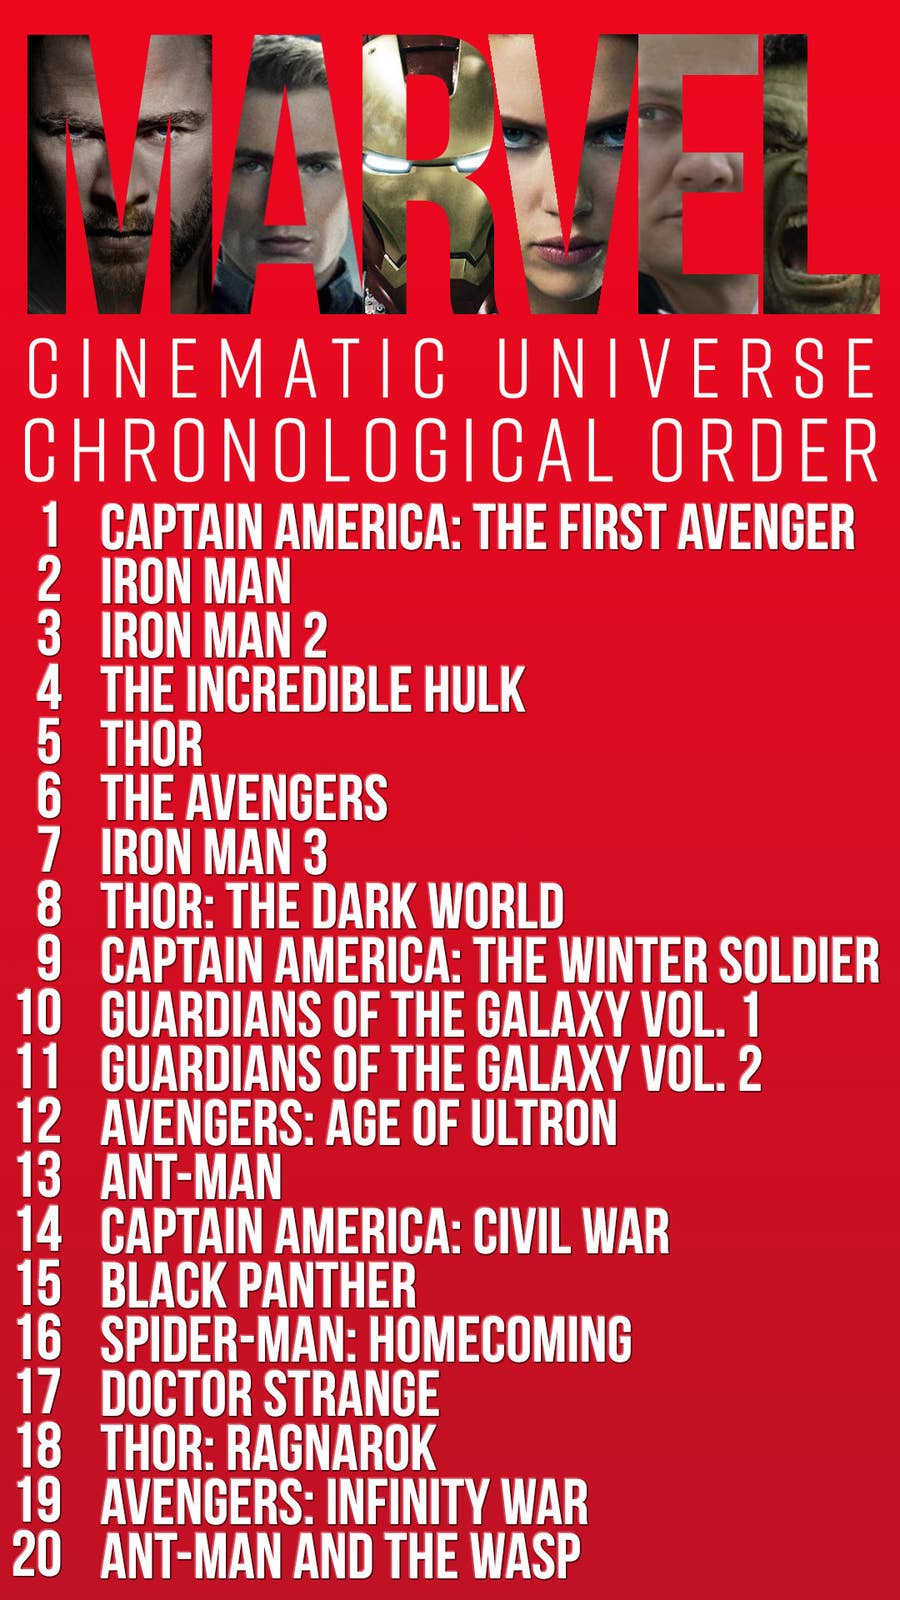 Marvel Movies In Order: How to Watch MCU Movies Chronologically